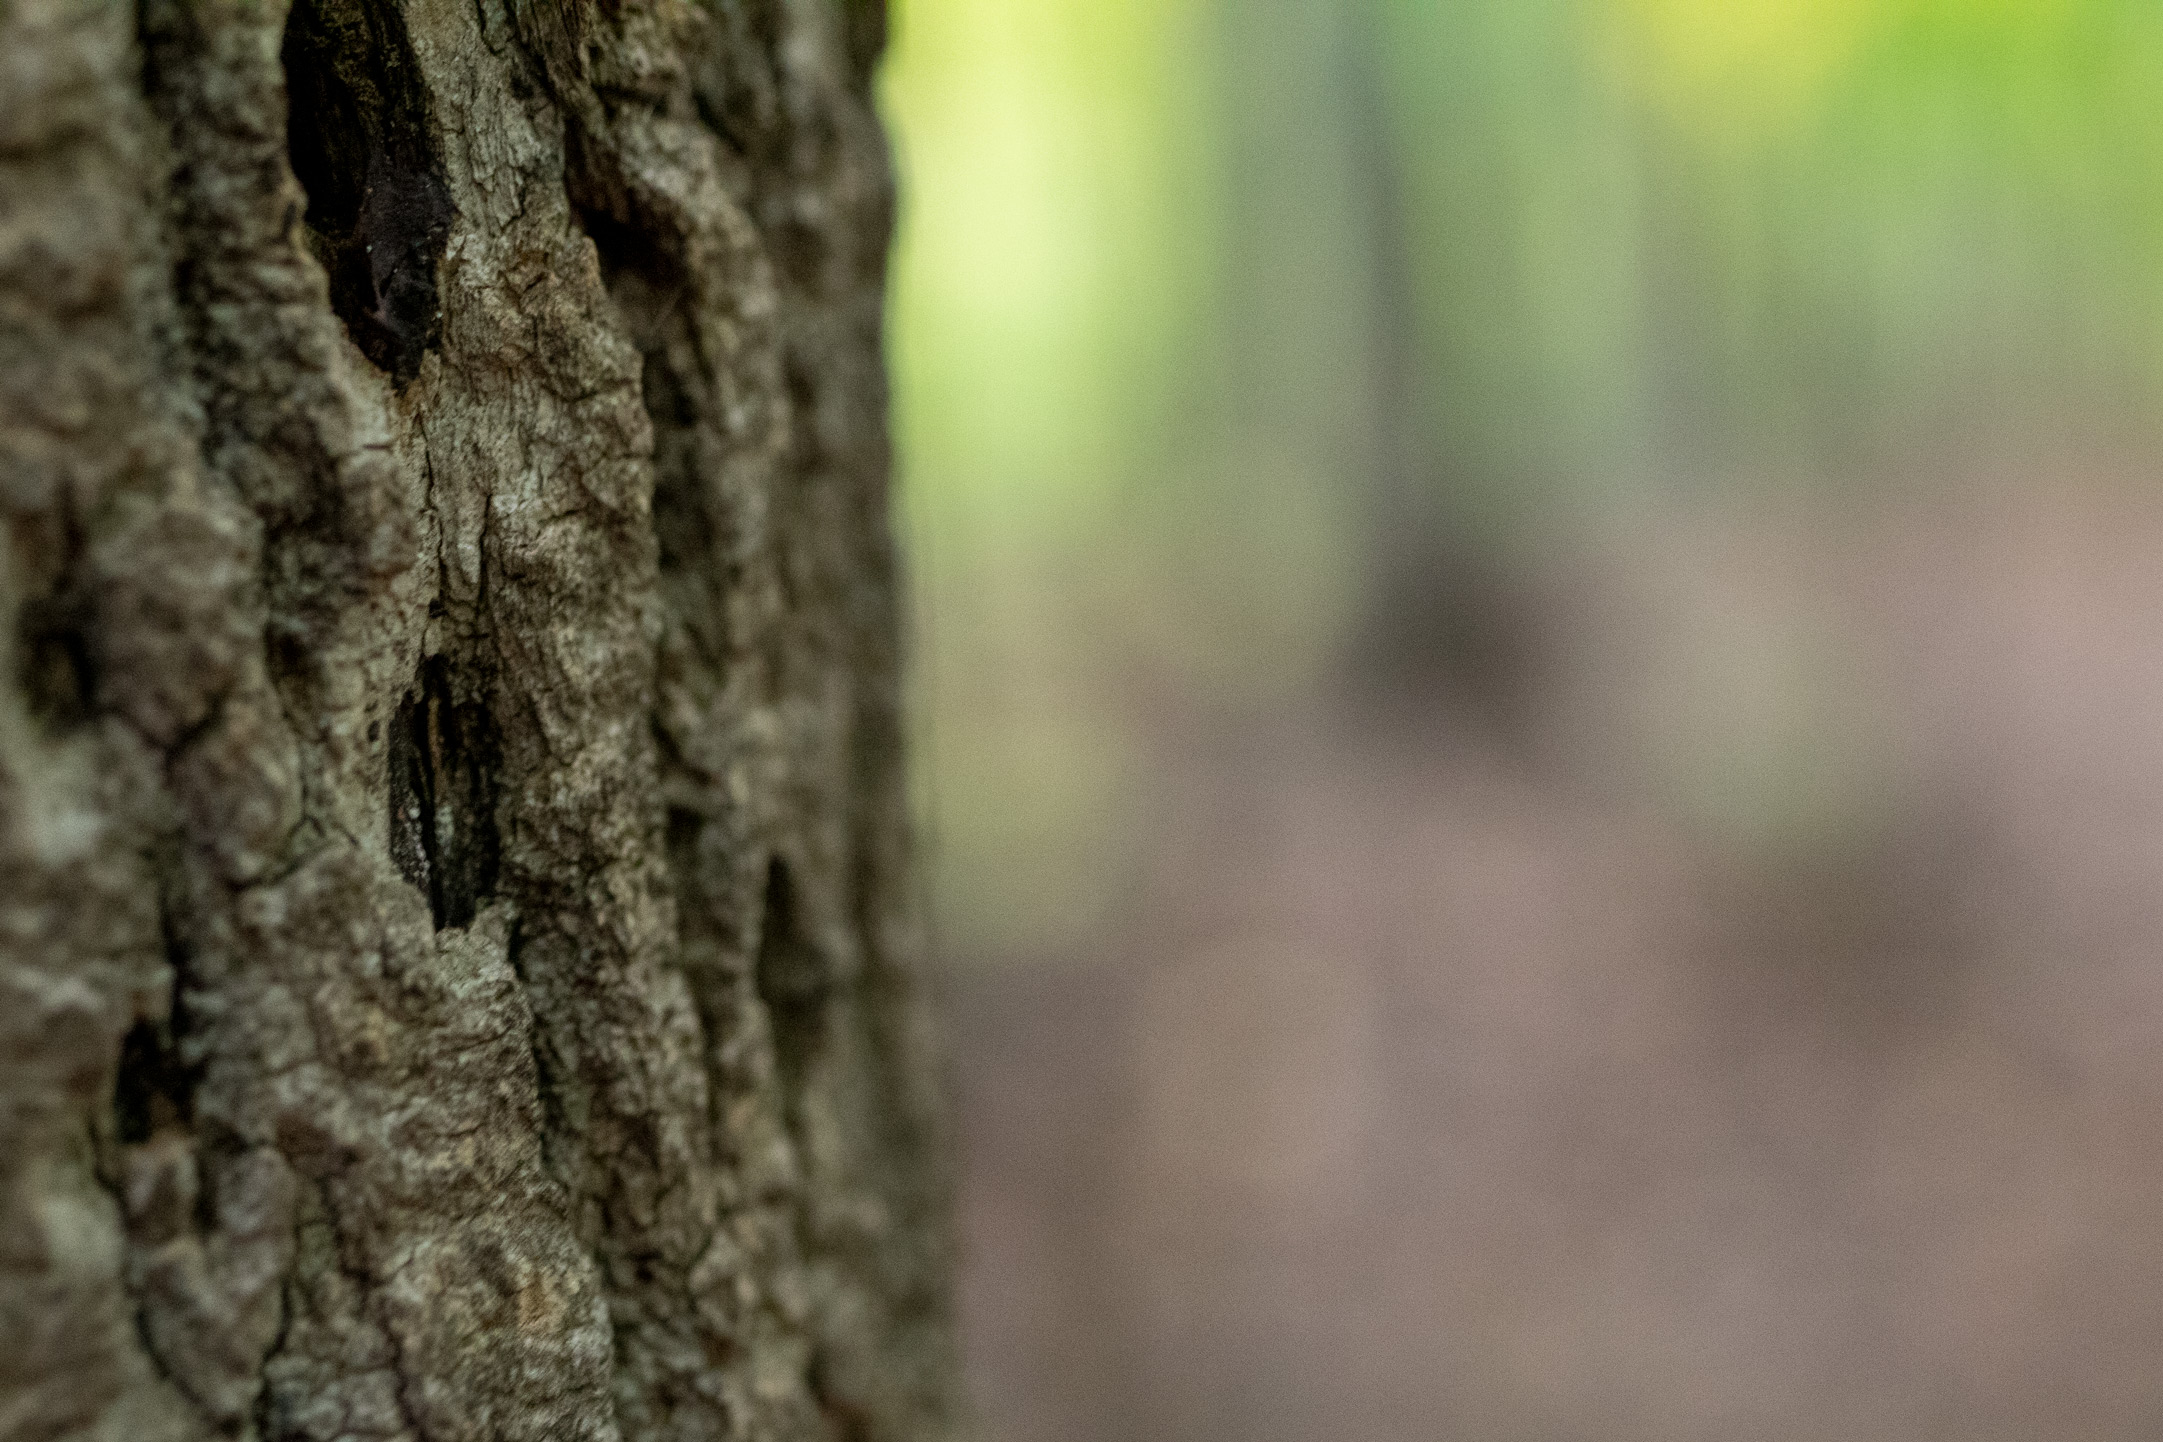 Macro shot of tree bark covered in healed woodpecker holes in front of an out-of-focus background